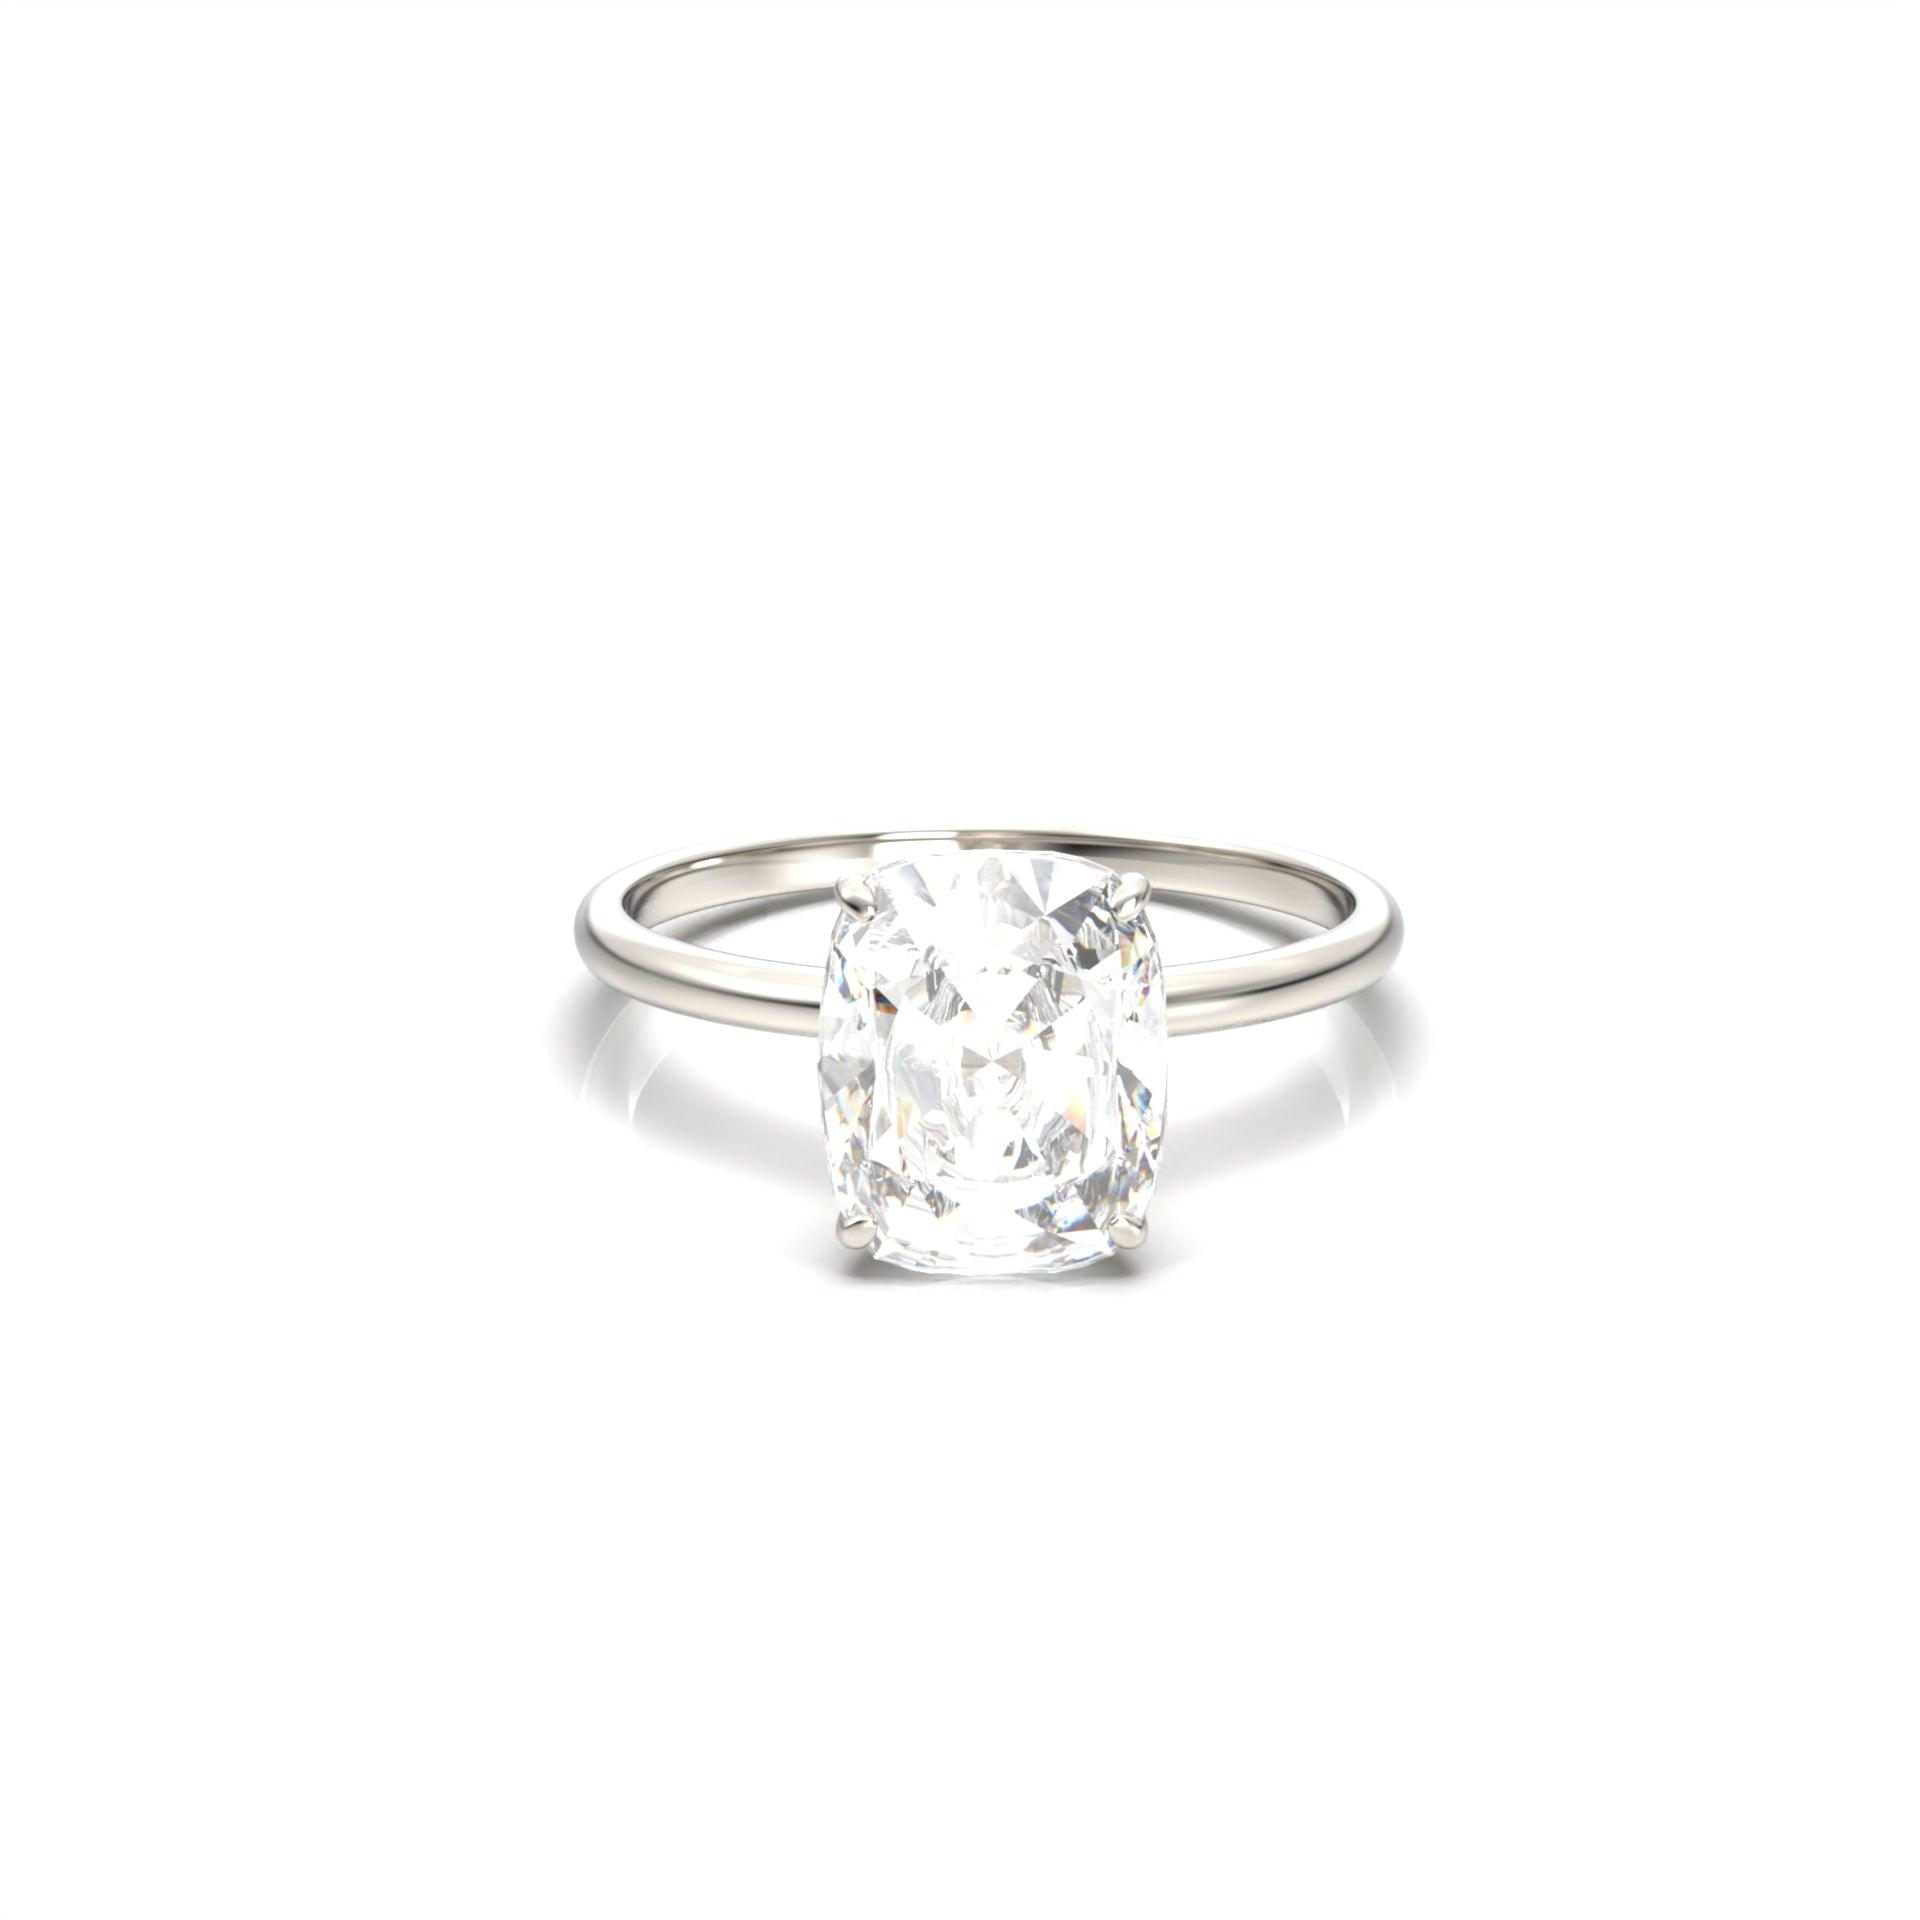 Elongated Cushion Cut 4 Claw Solitaire Ring Moissanite Engagement Ring - moissaniteengagementrings